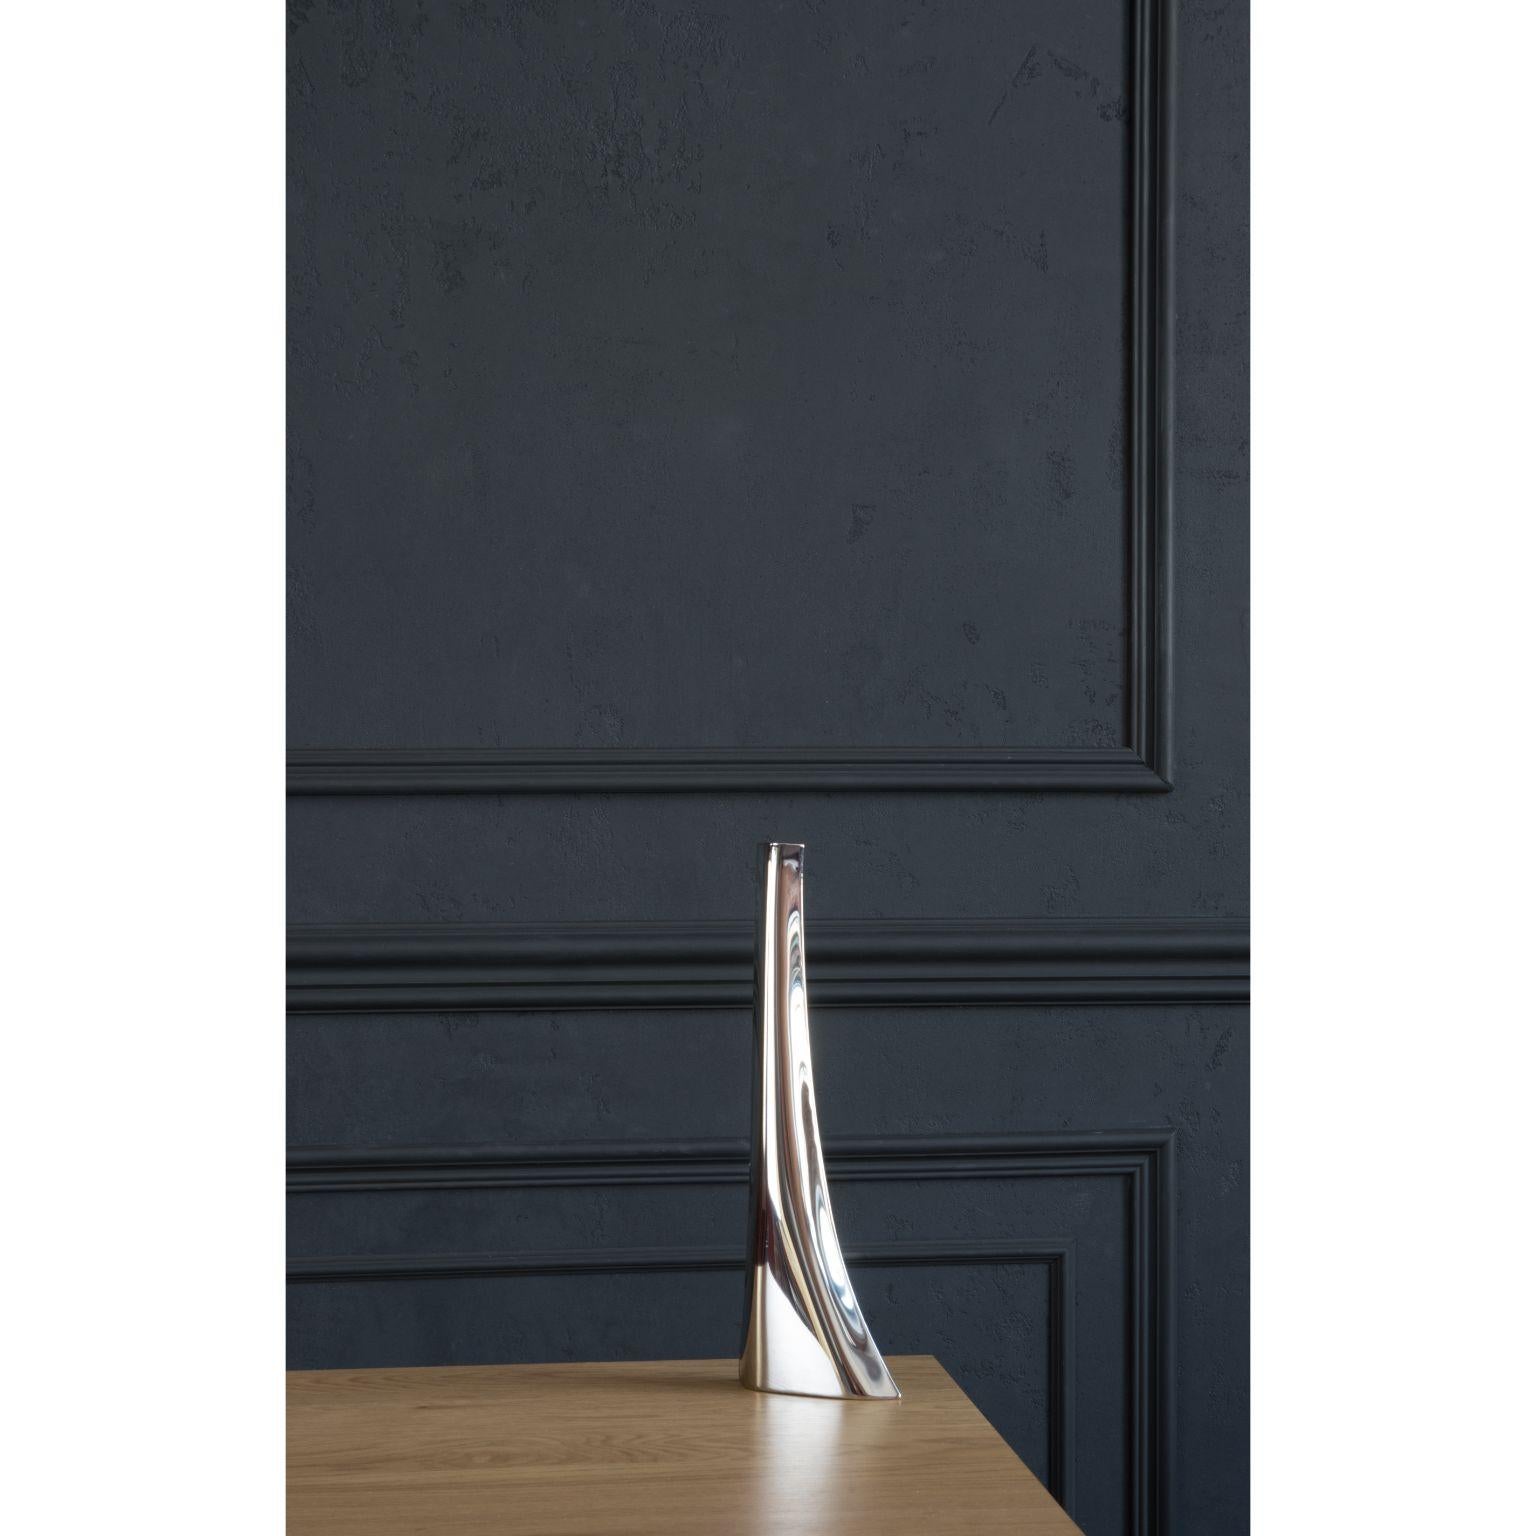 Leyki Vase 27 by Zieta
Dimensions: D 16 x W 11 x H 27 cm.
Materials: Polished stainless steel.

Multifunctional subtlety
Leyki is a functional object with an architectural twist. It saturates expression
from slenderness and gloss. It translates